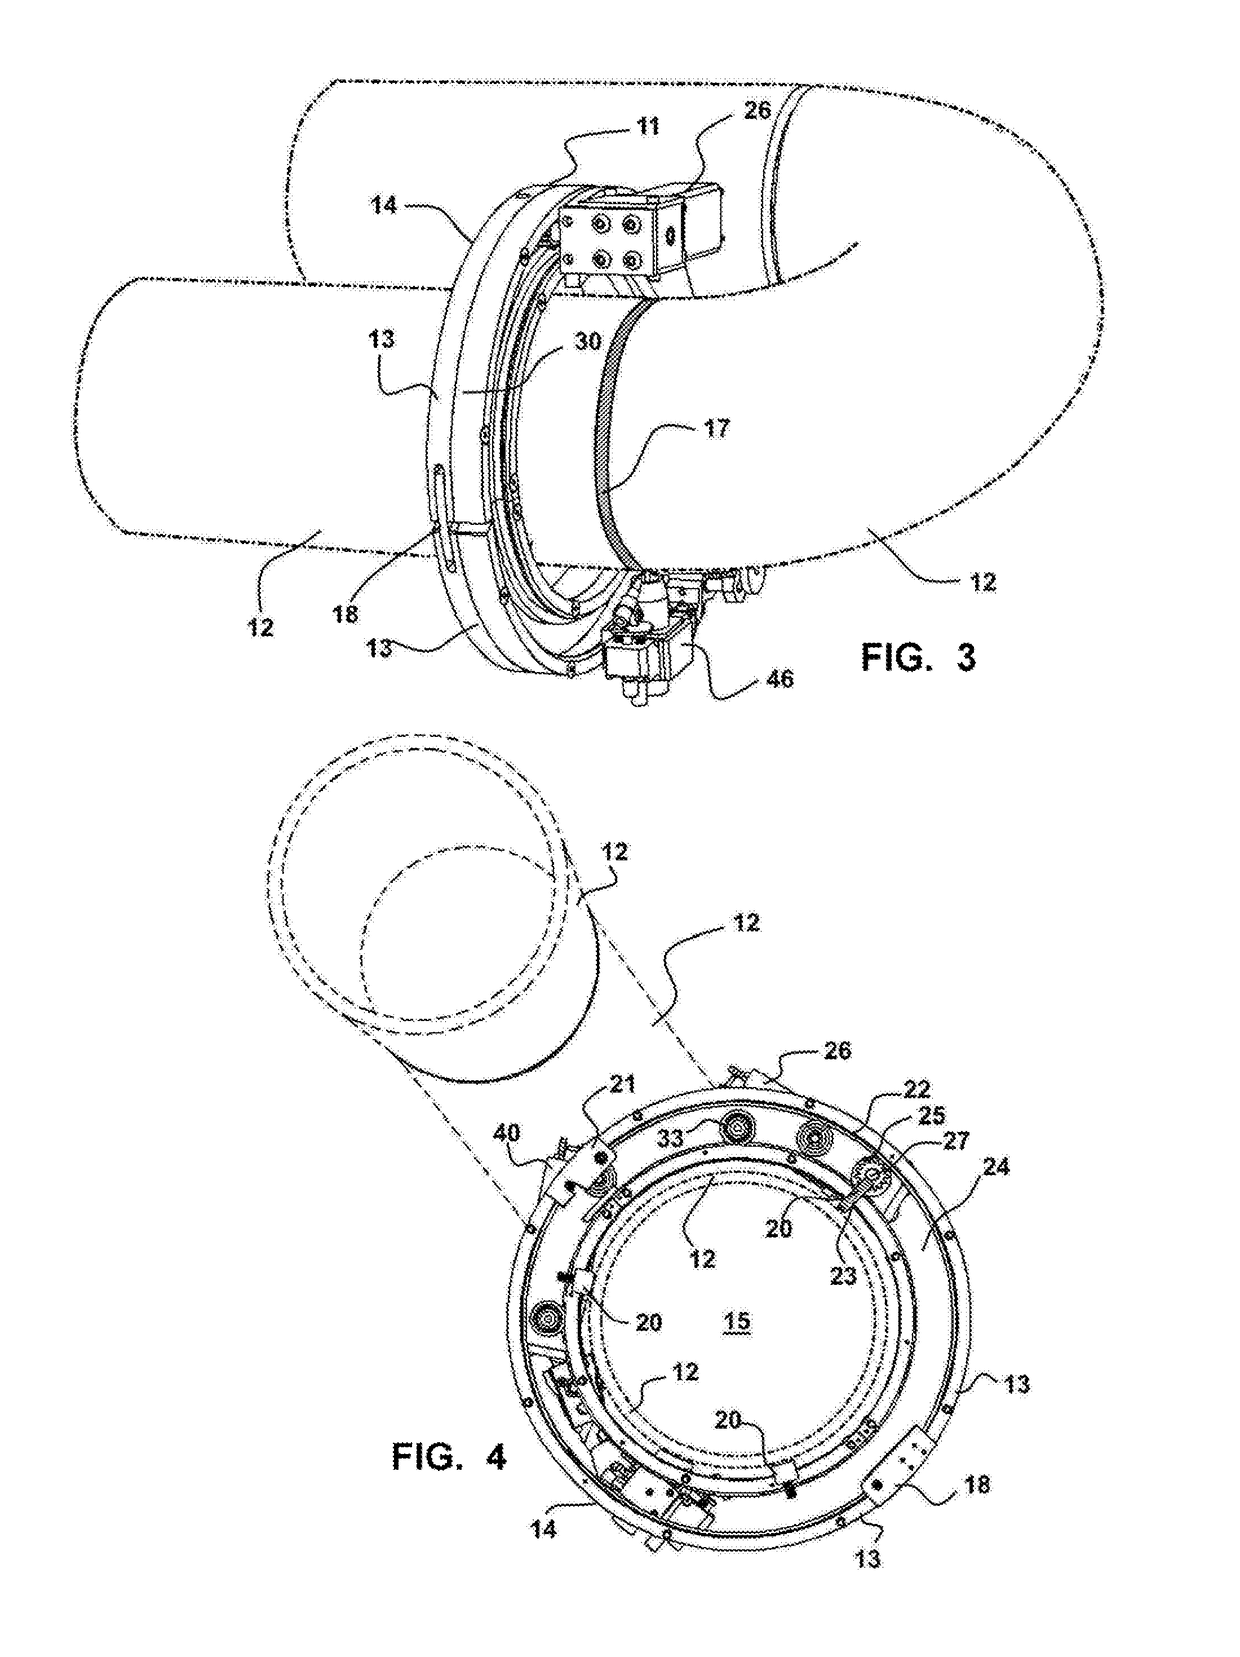 Orbital Welder With Integrated Track And Gear Drive